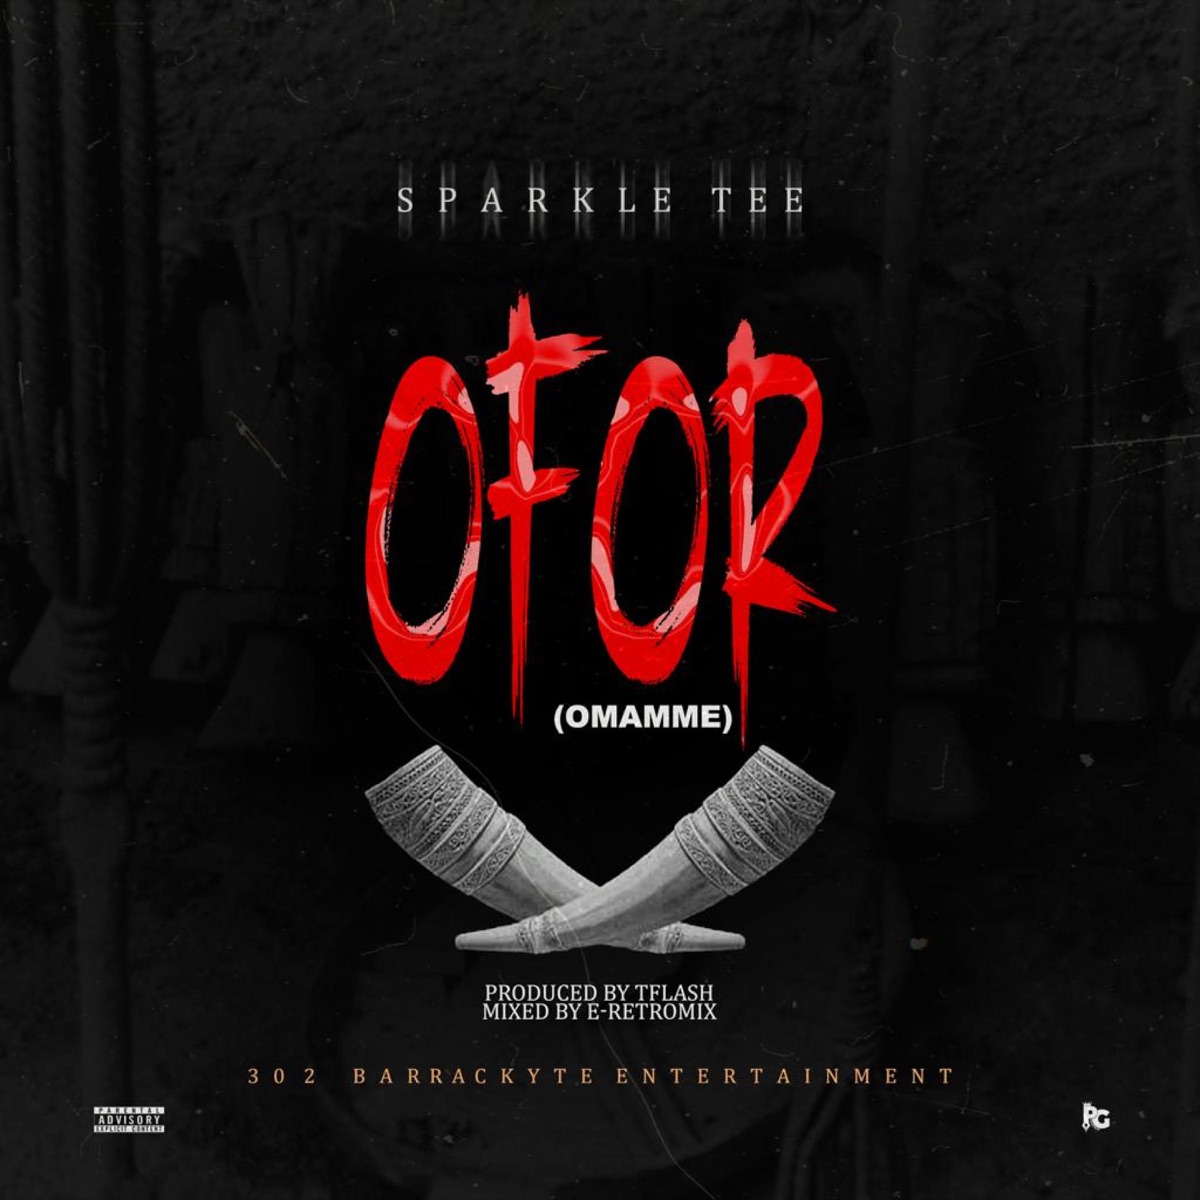 Sparkle Tee – Ofor (Omamme)